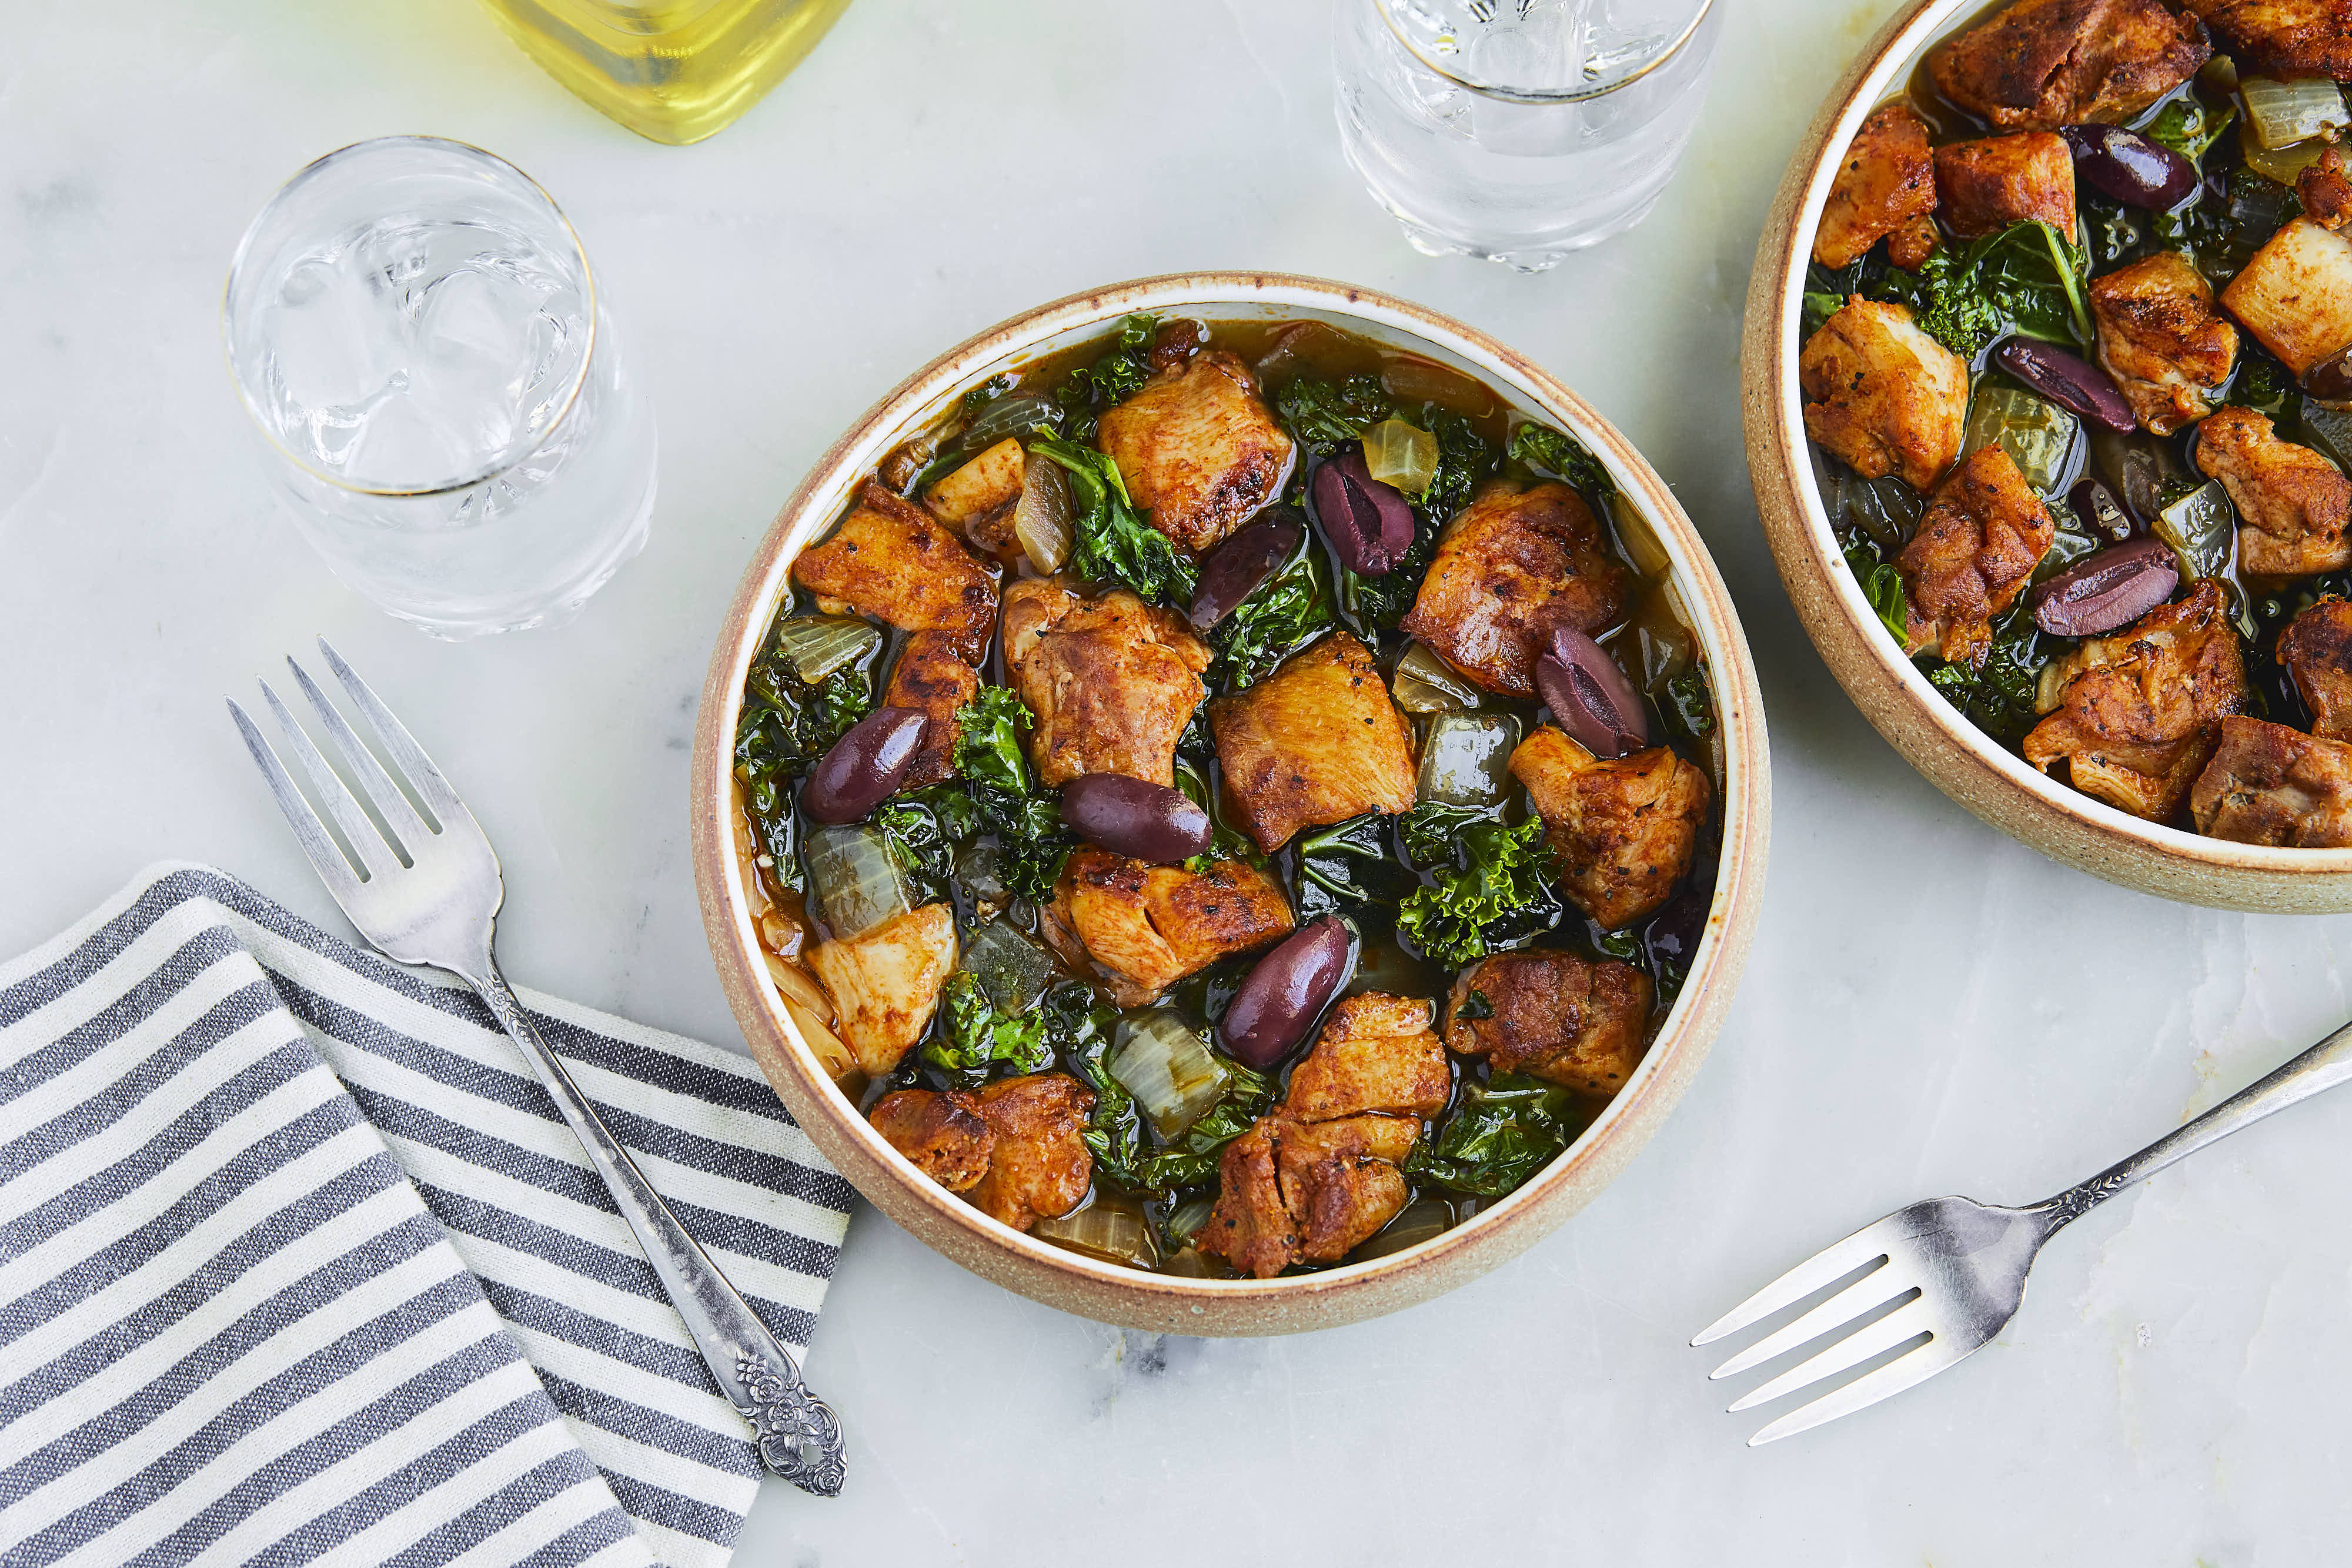 Braised Chicken Thighs with Olives and Kale